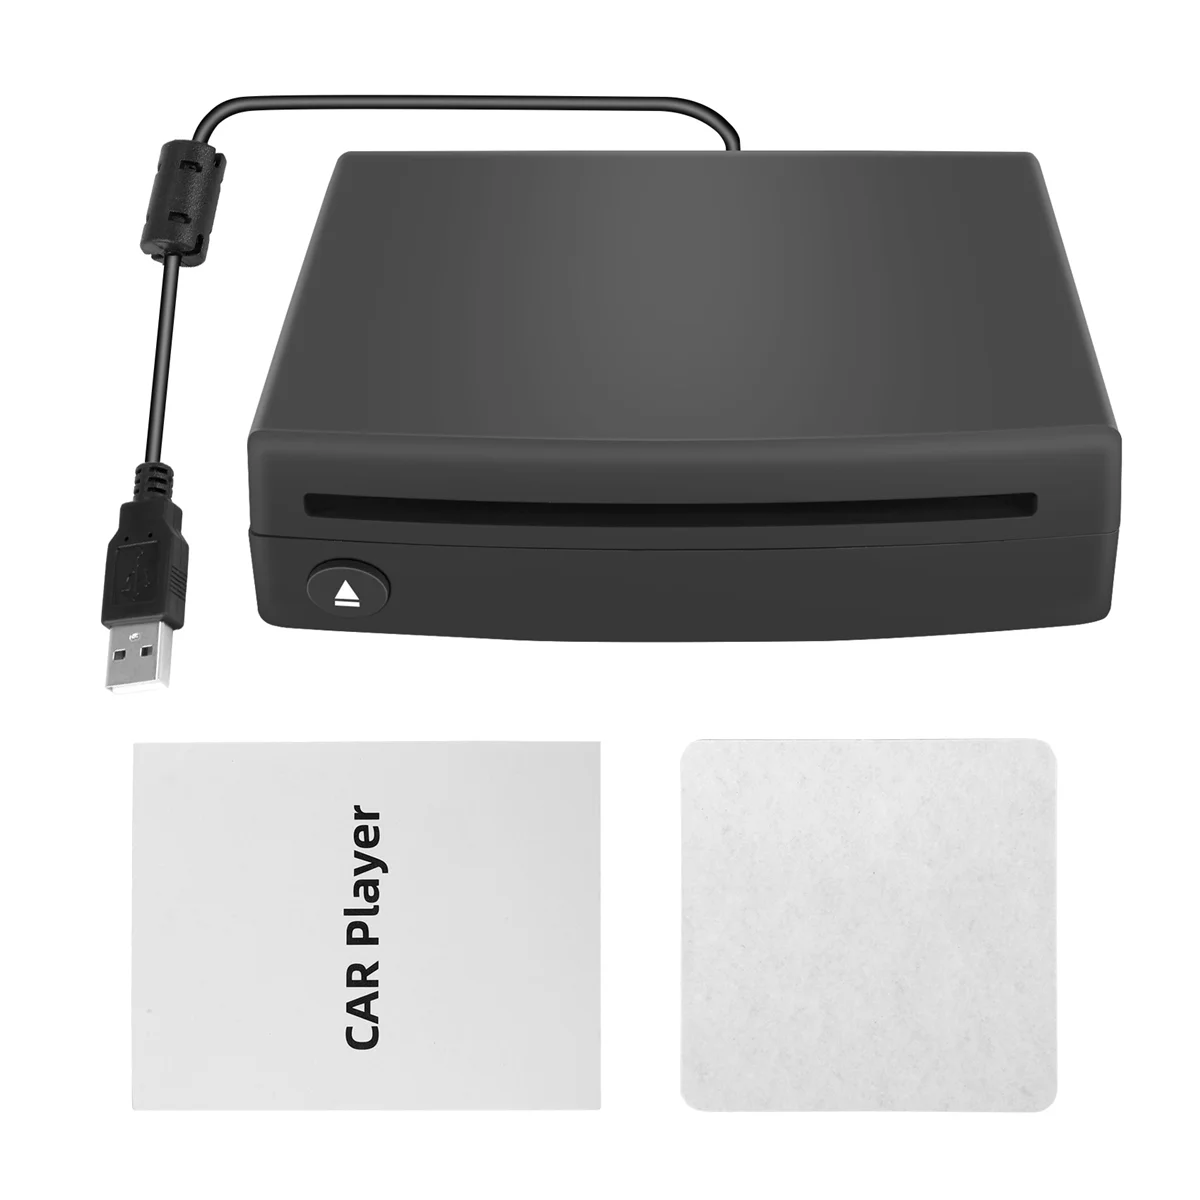 

Slim External Car CD Player Compatible PC LED TV/MP5 Android GPS Navigation Universal USB Power Slot-in Type Player